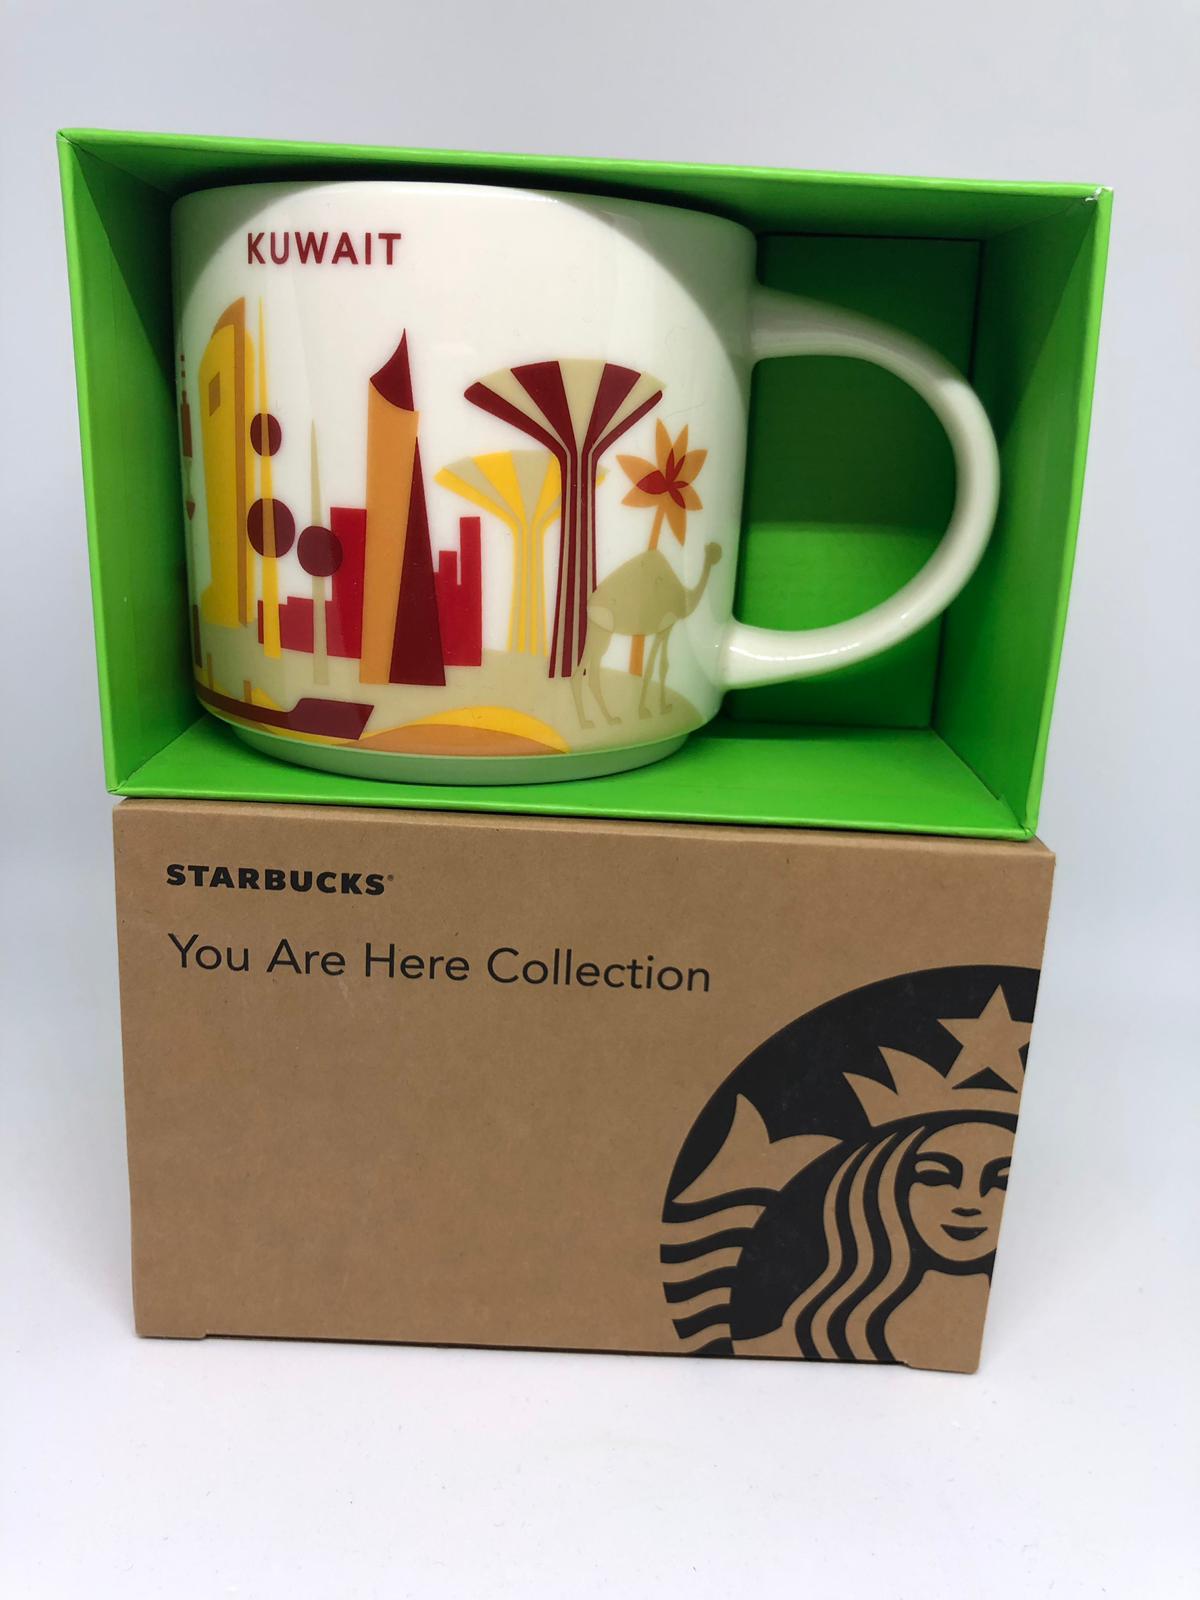 Starbucks You Are Here Collection Kuwait Ceramic Coffee Mug New with Box